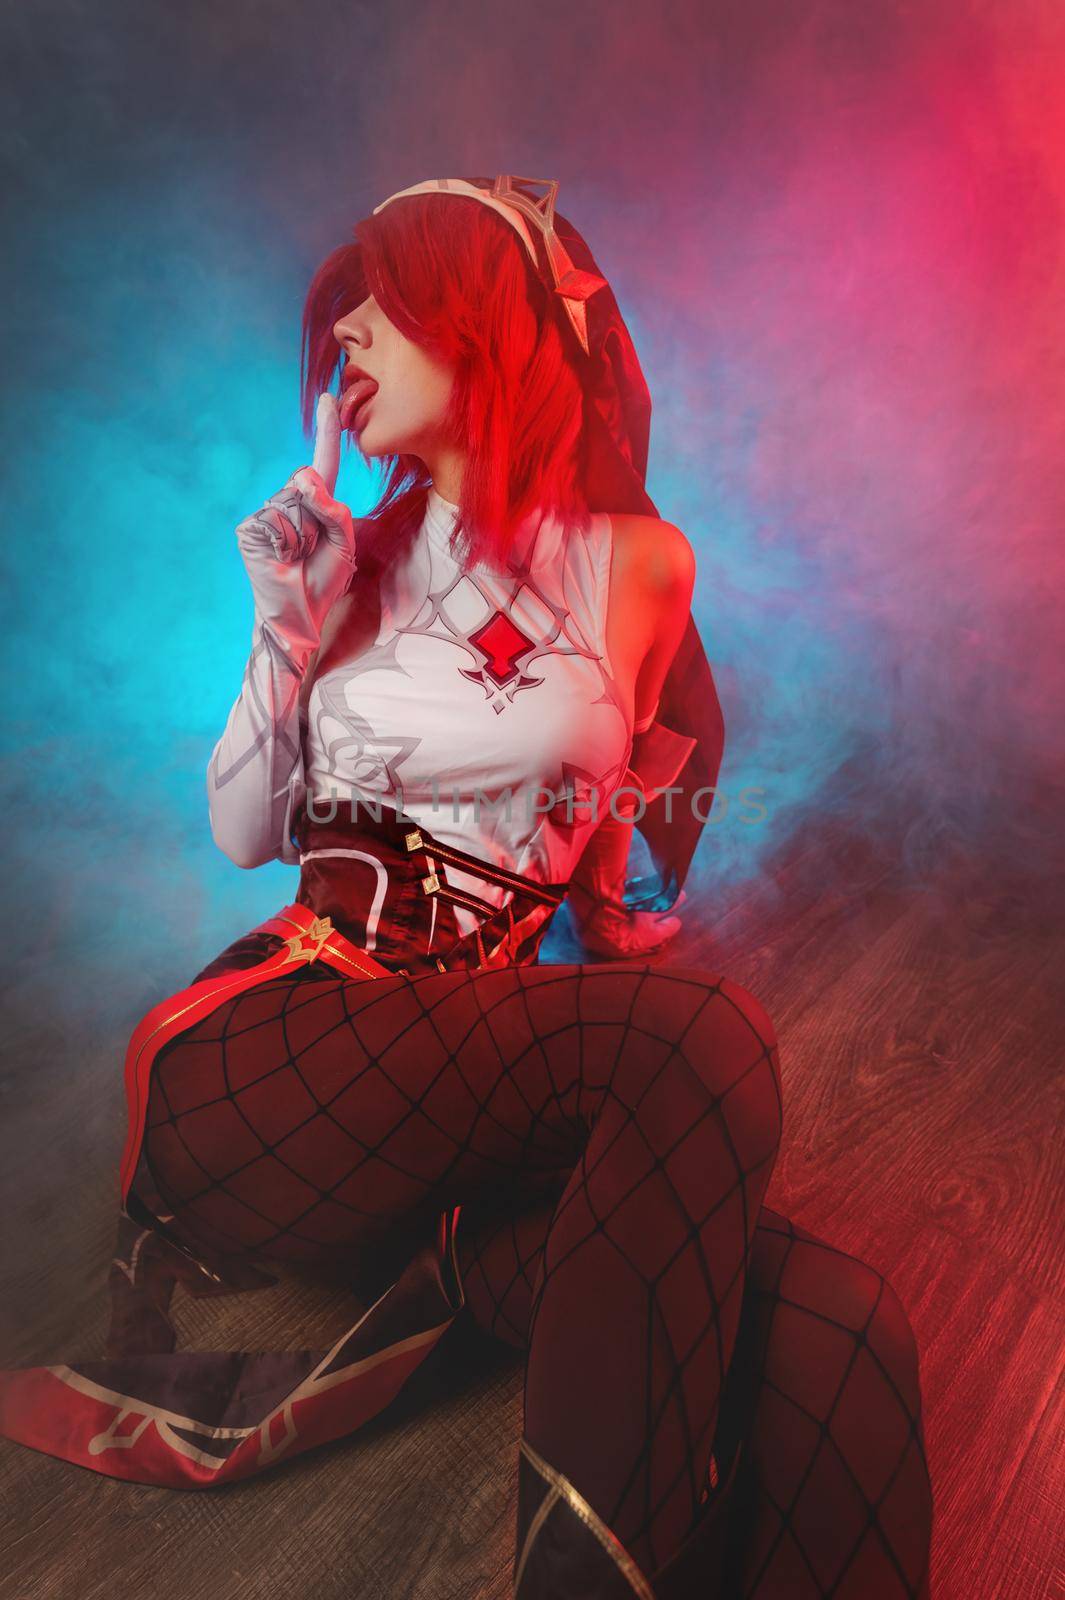 sexy young caucasian girl licks her finger in a cosplay costume, in fishnet stockings. sits on a wooden floor in smoke